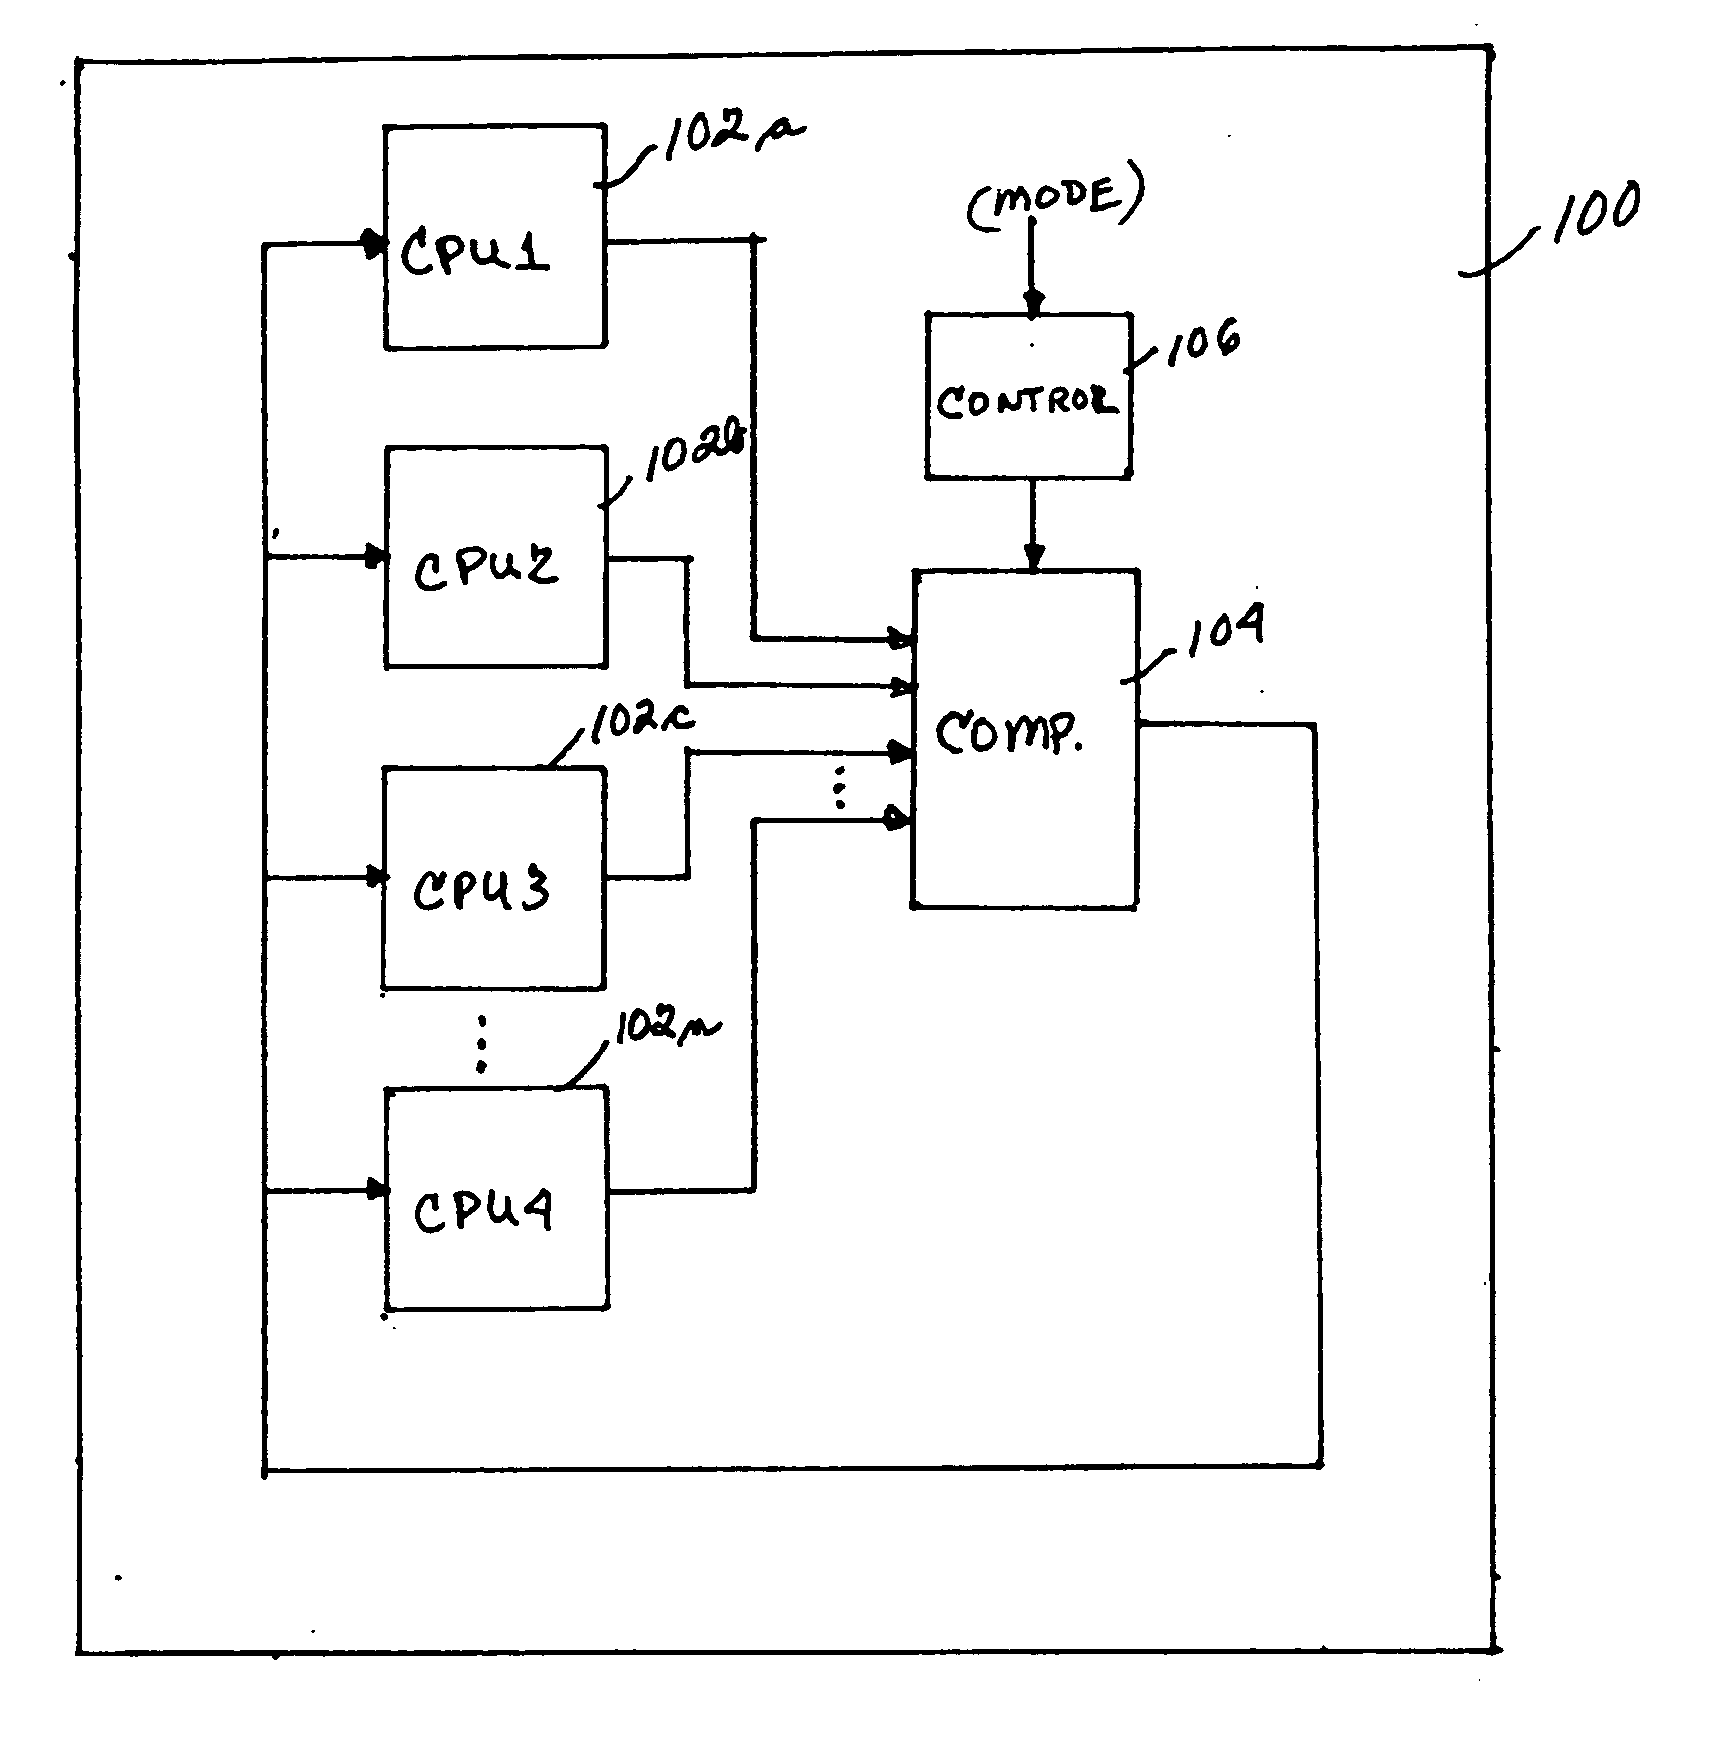 System and method for dynamically optimizing performance and reliability of redundant processing systems